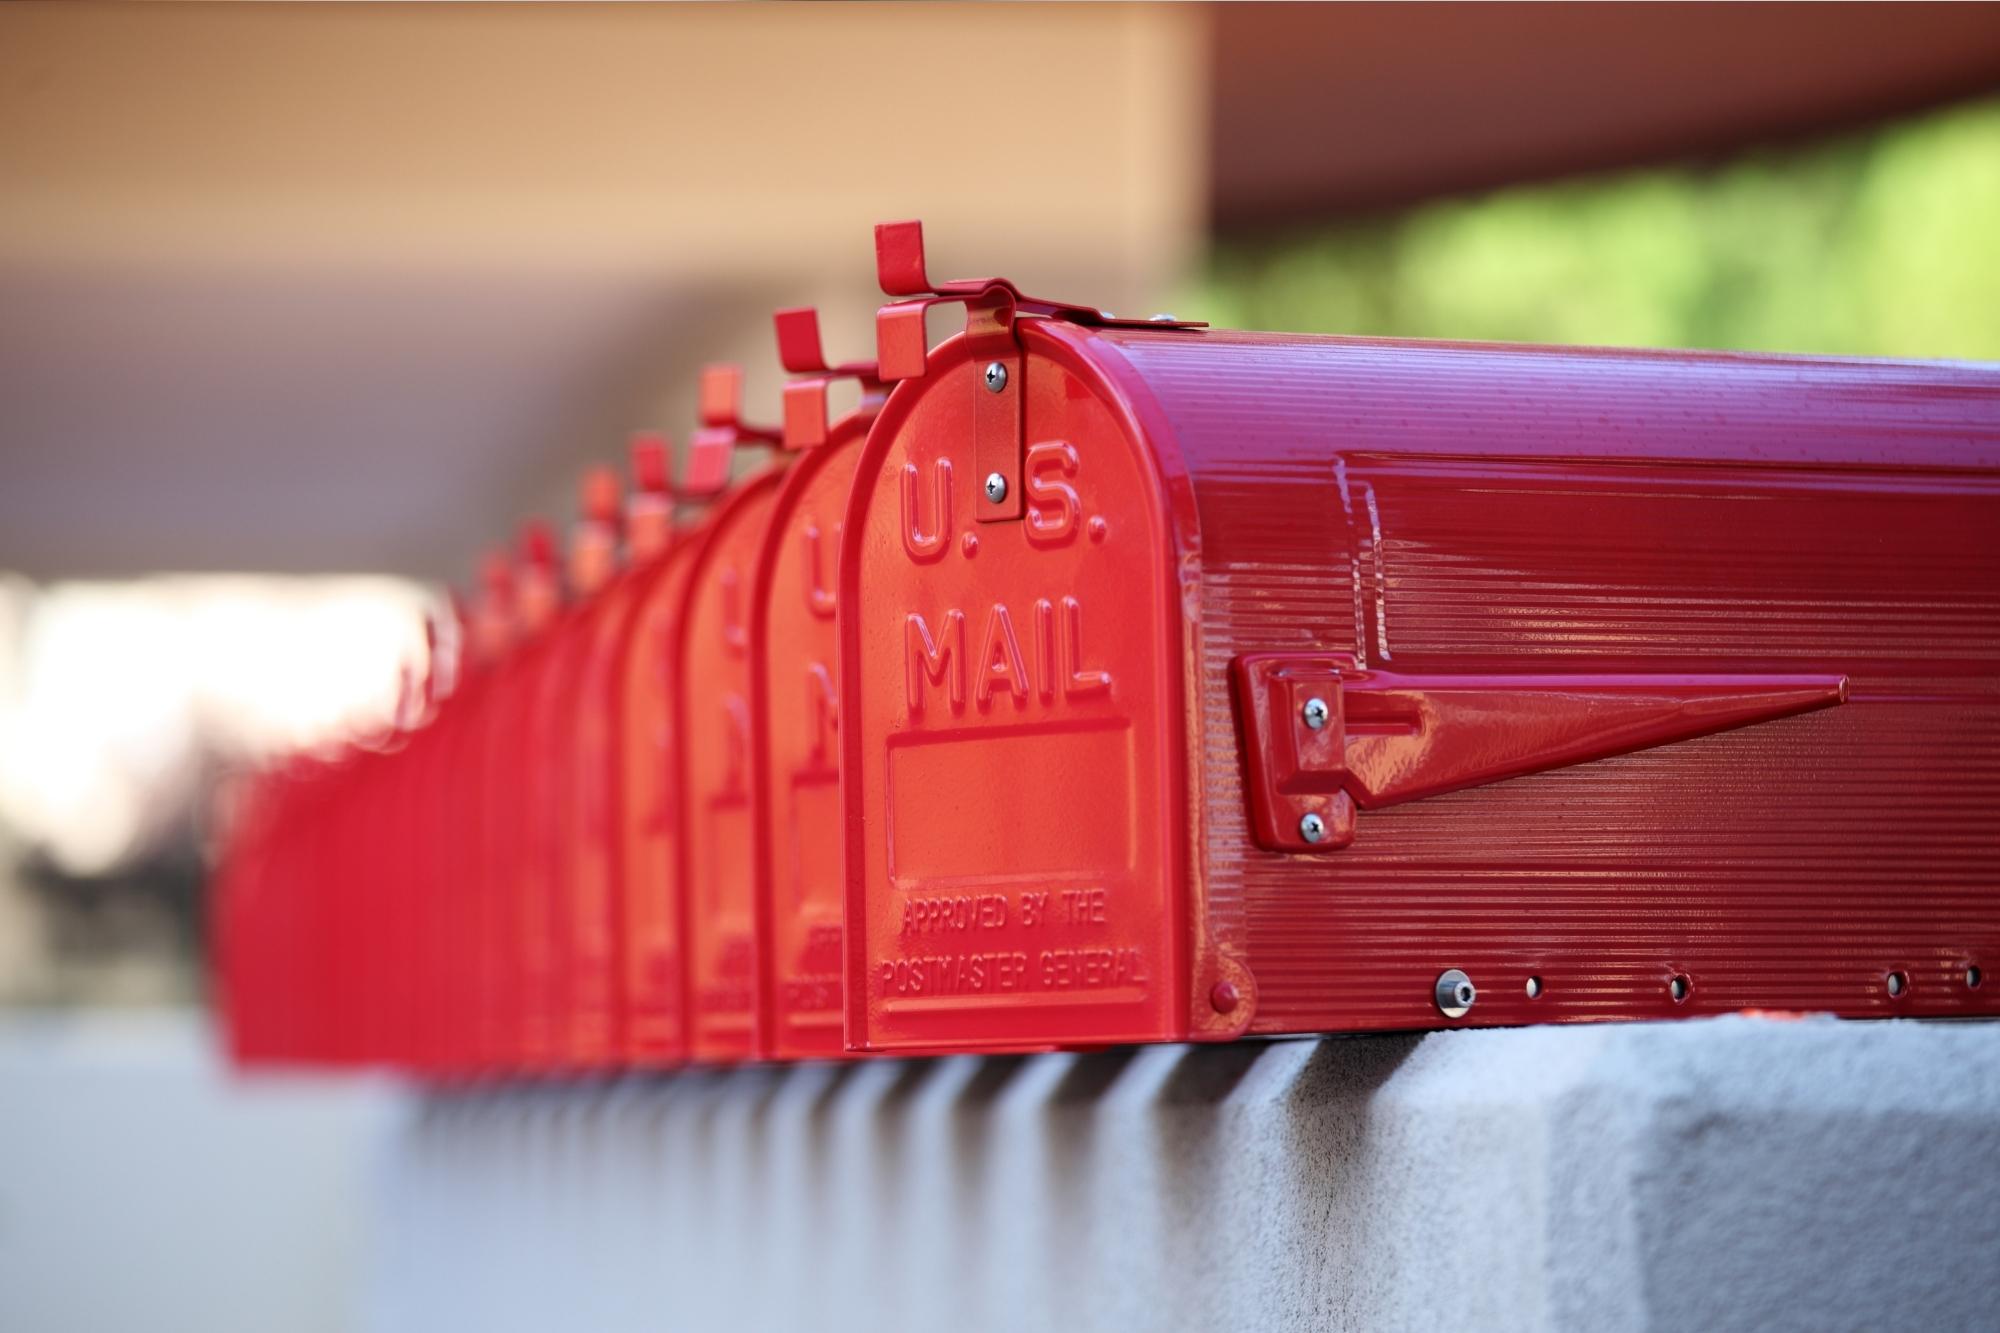 USPS Postage Increase: Starting August 29, 2021